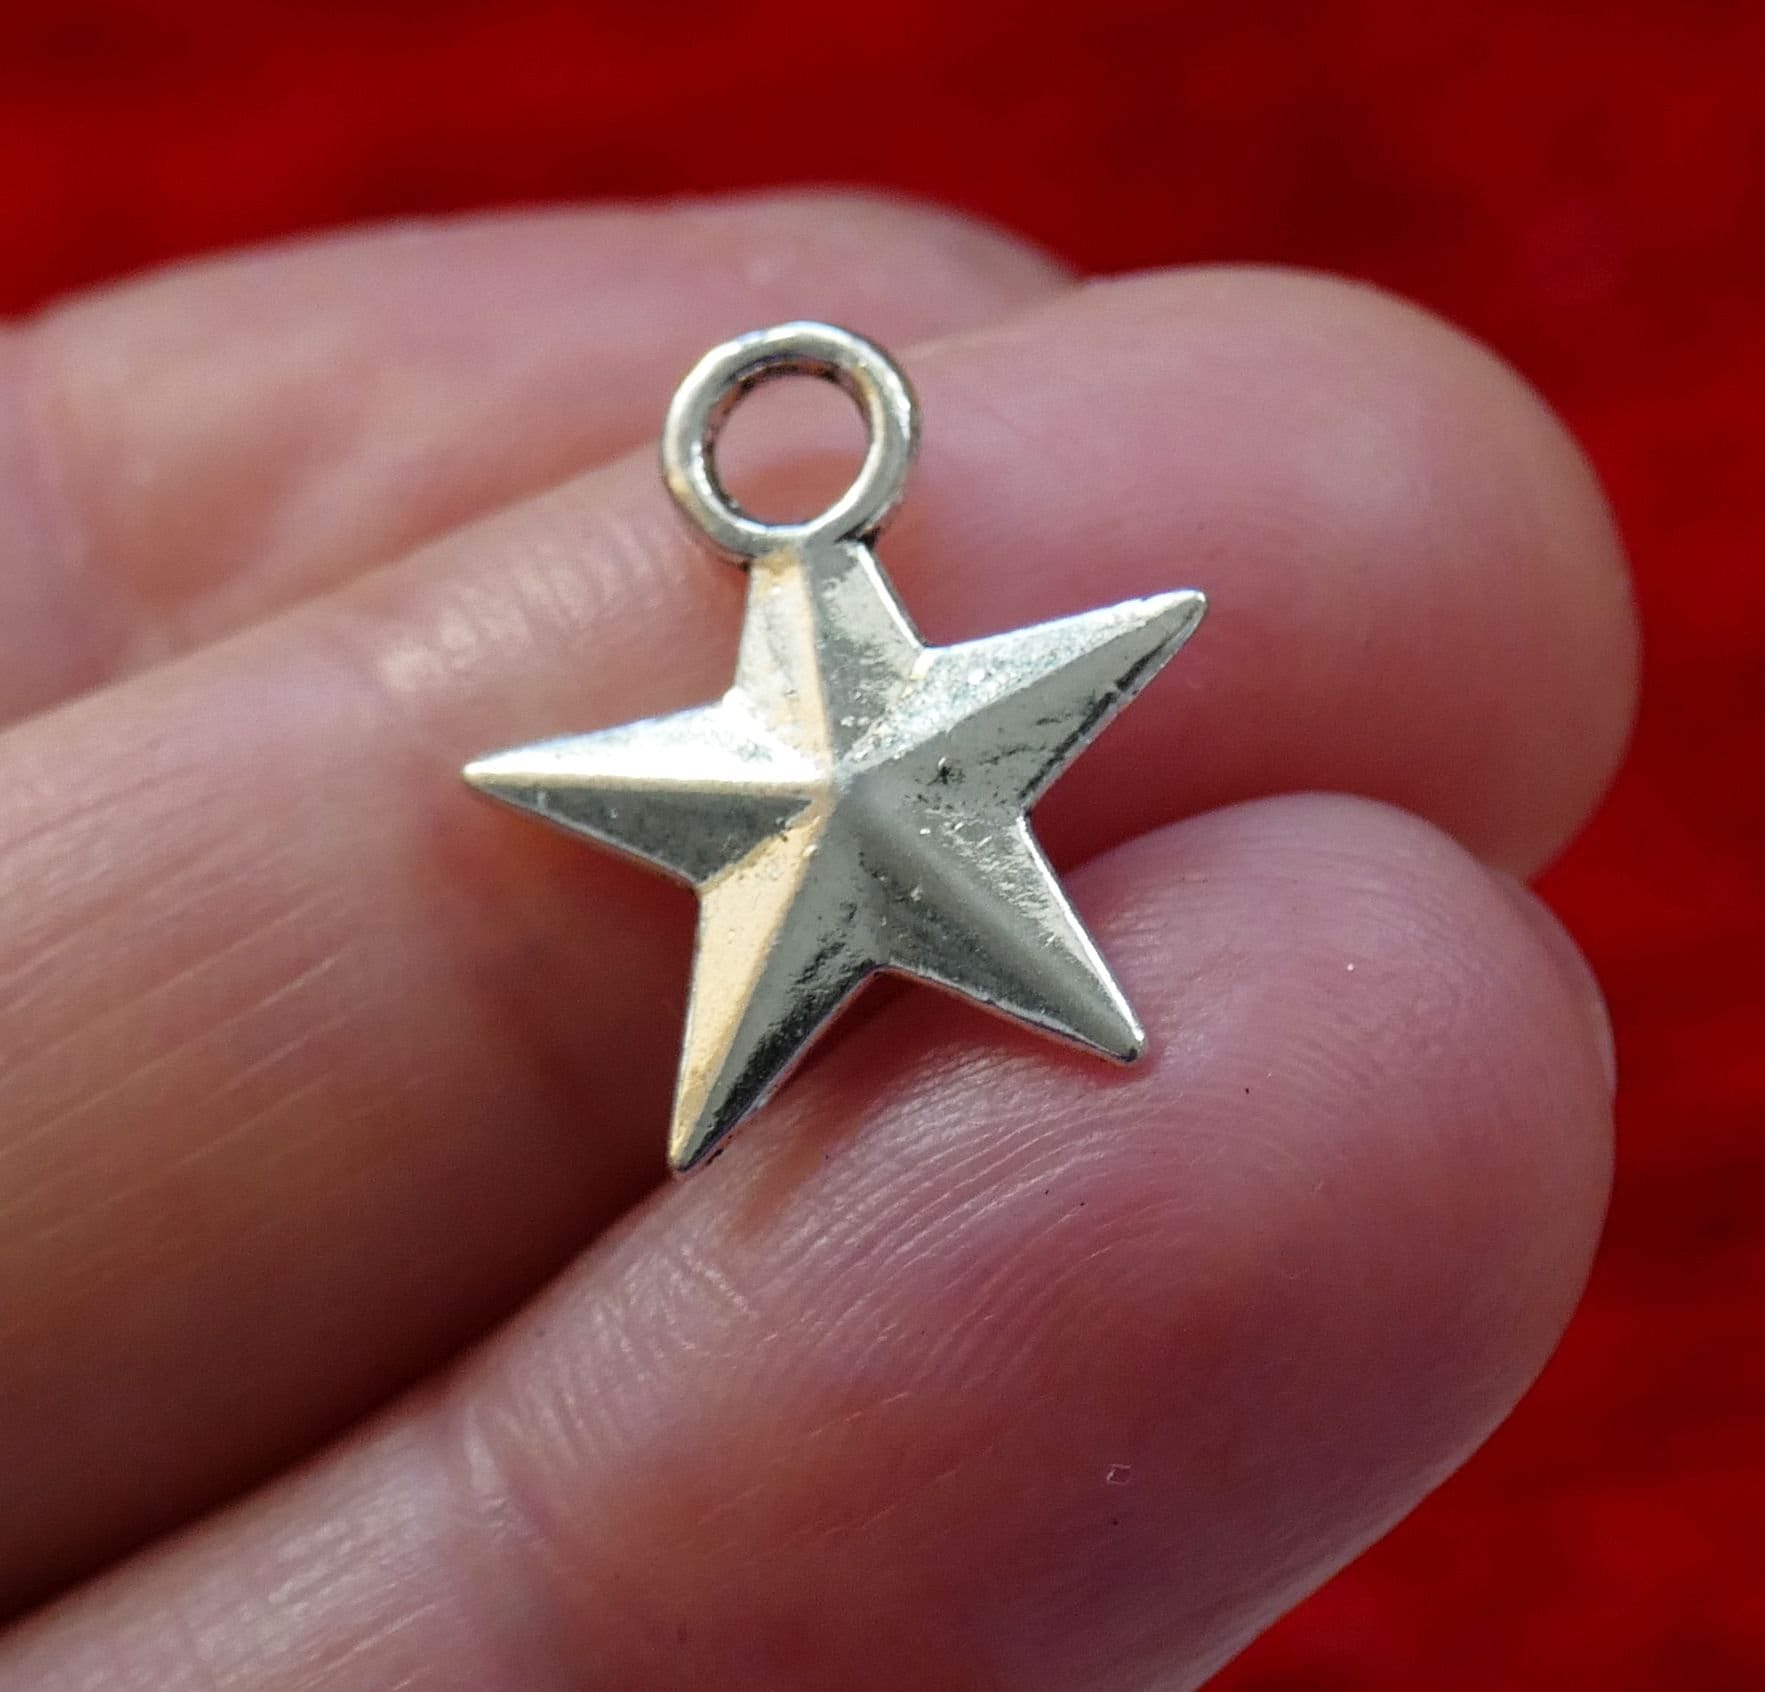 10x Star Charms, Silver Tone Small Metal Charms, Free Shipping